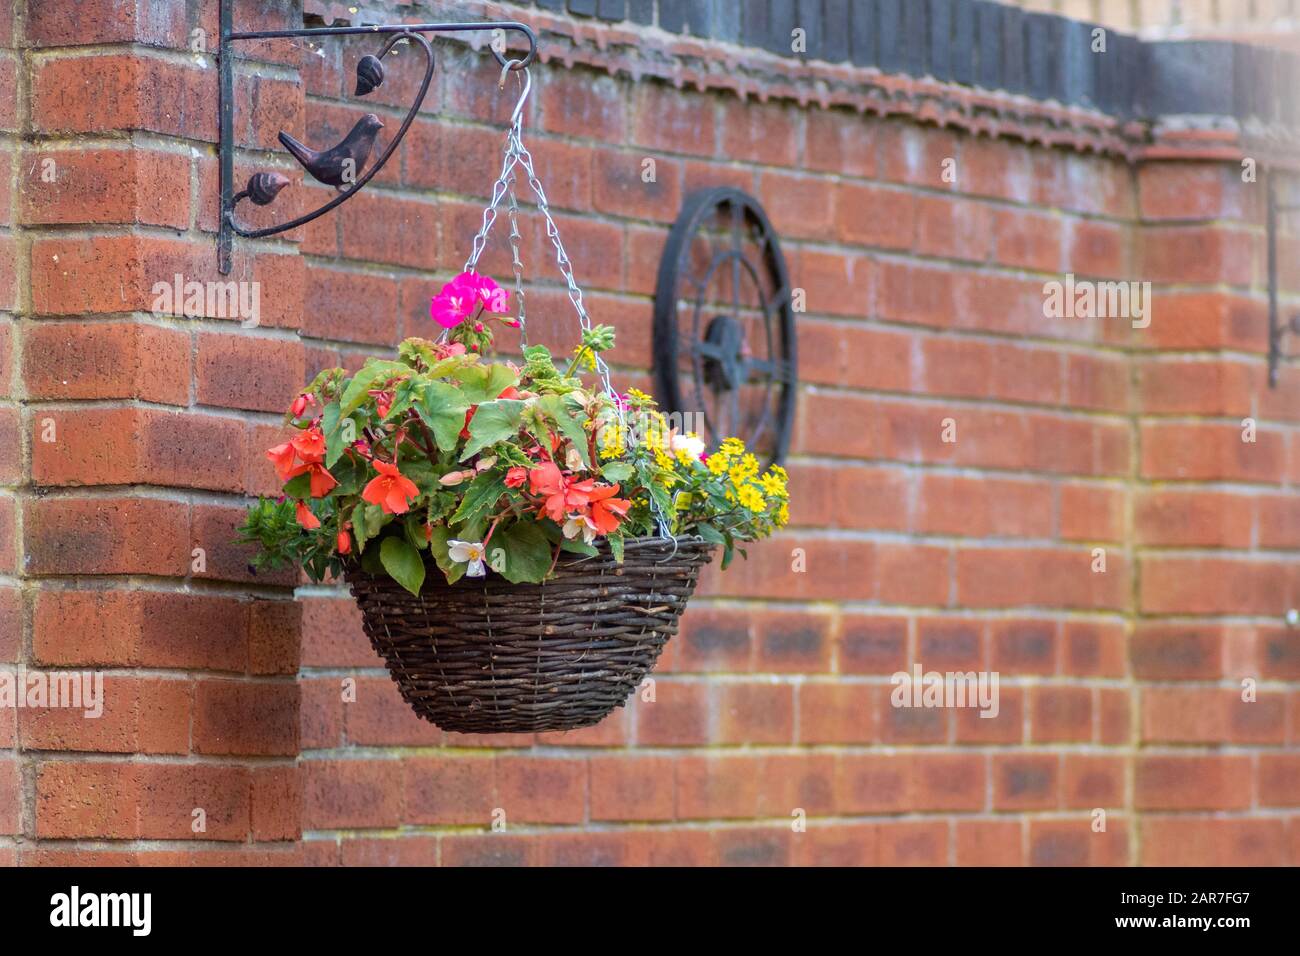 Hanging basket of flowers against brick wall in garden Stock Photo